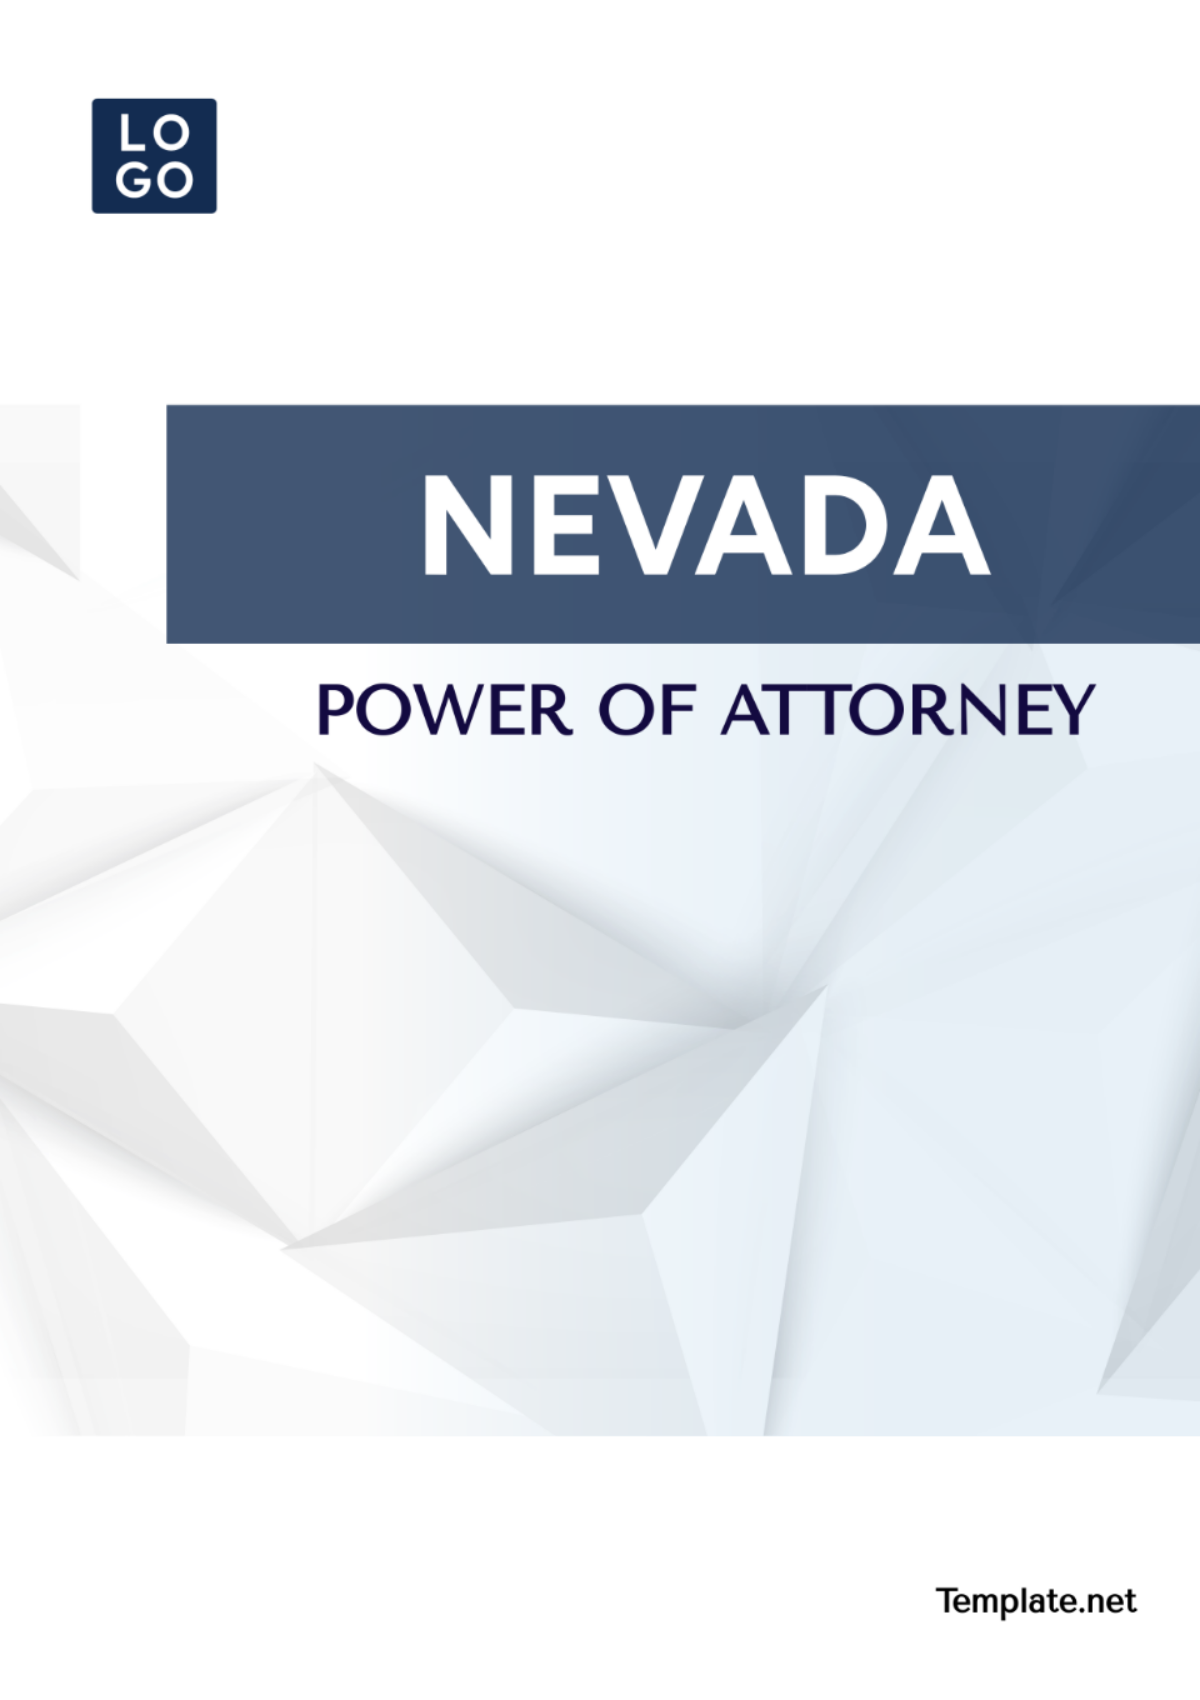 Nevada Power of Attorney Template